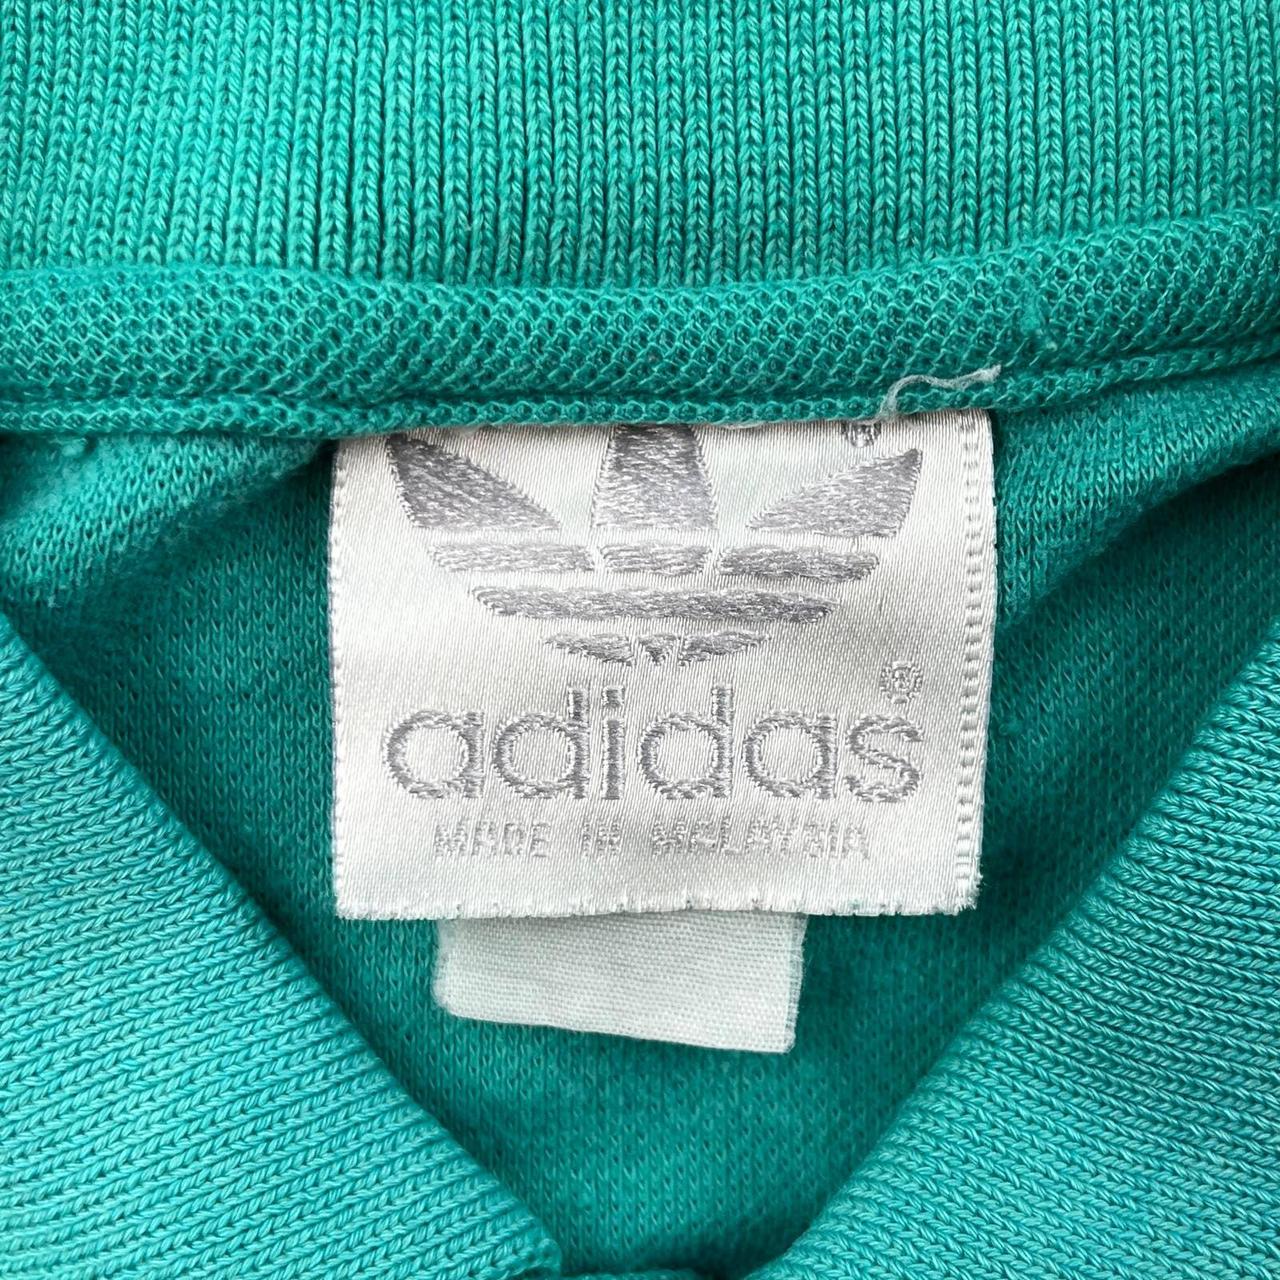 Vintage Adidas Polo Shirt Adult Small Turquoise Blue... - Depop